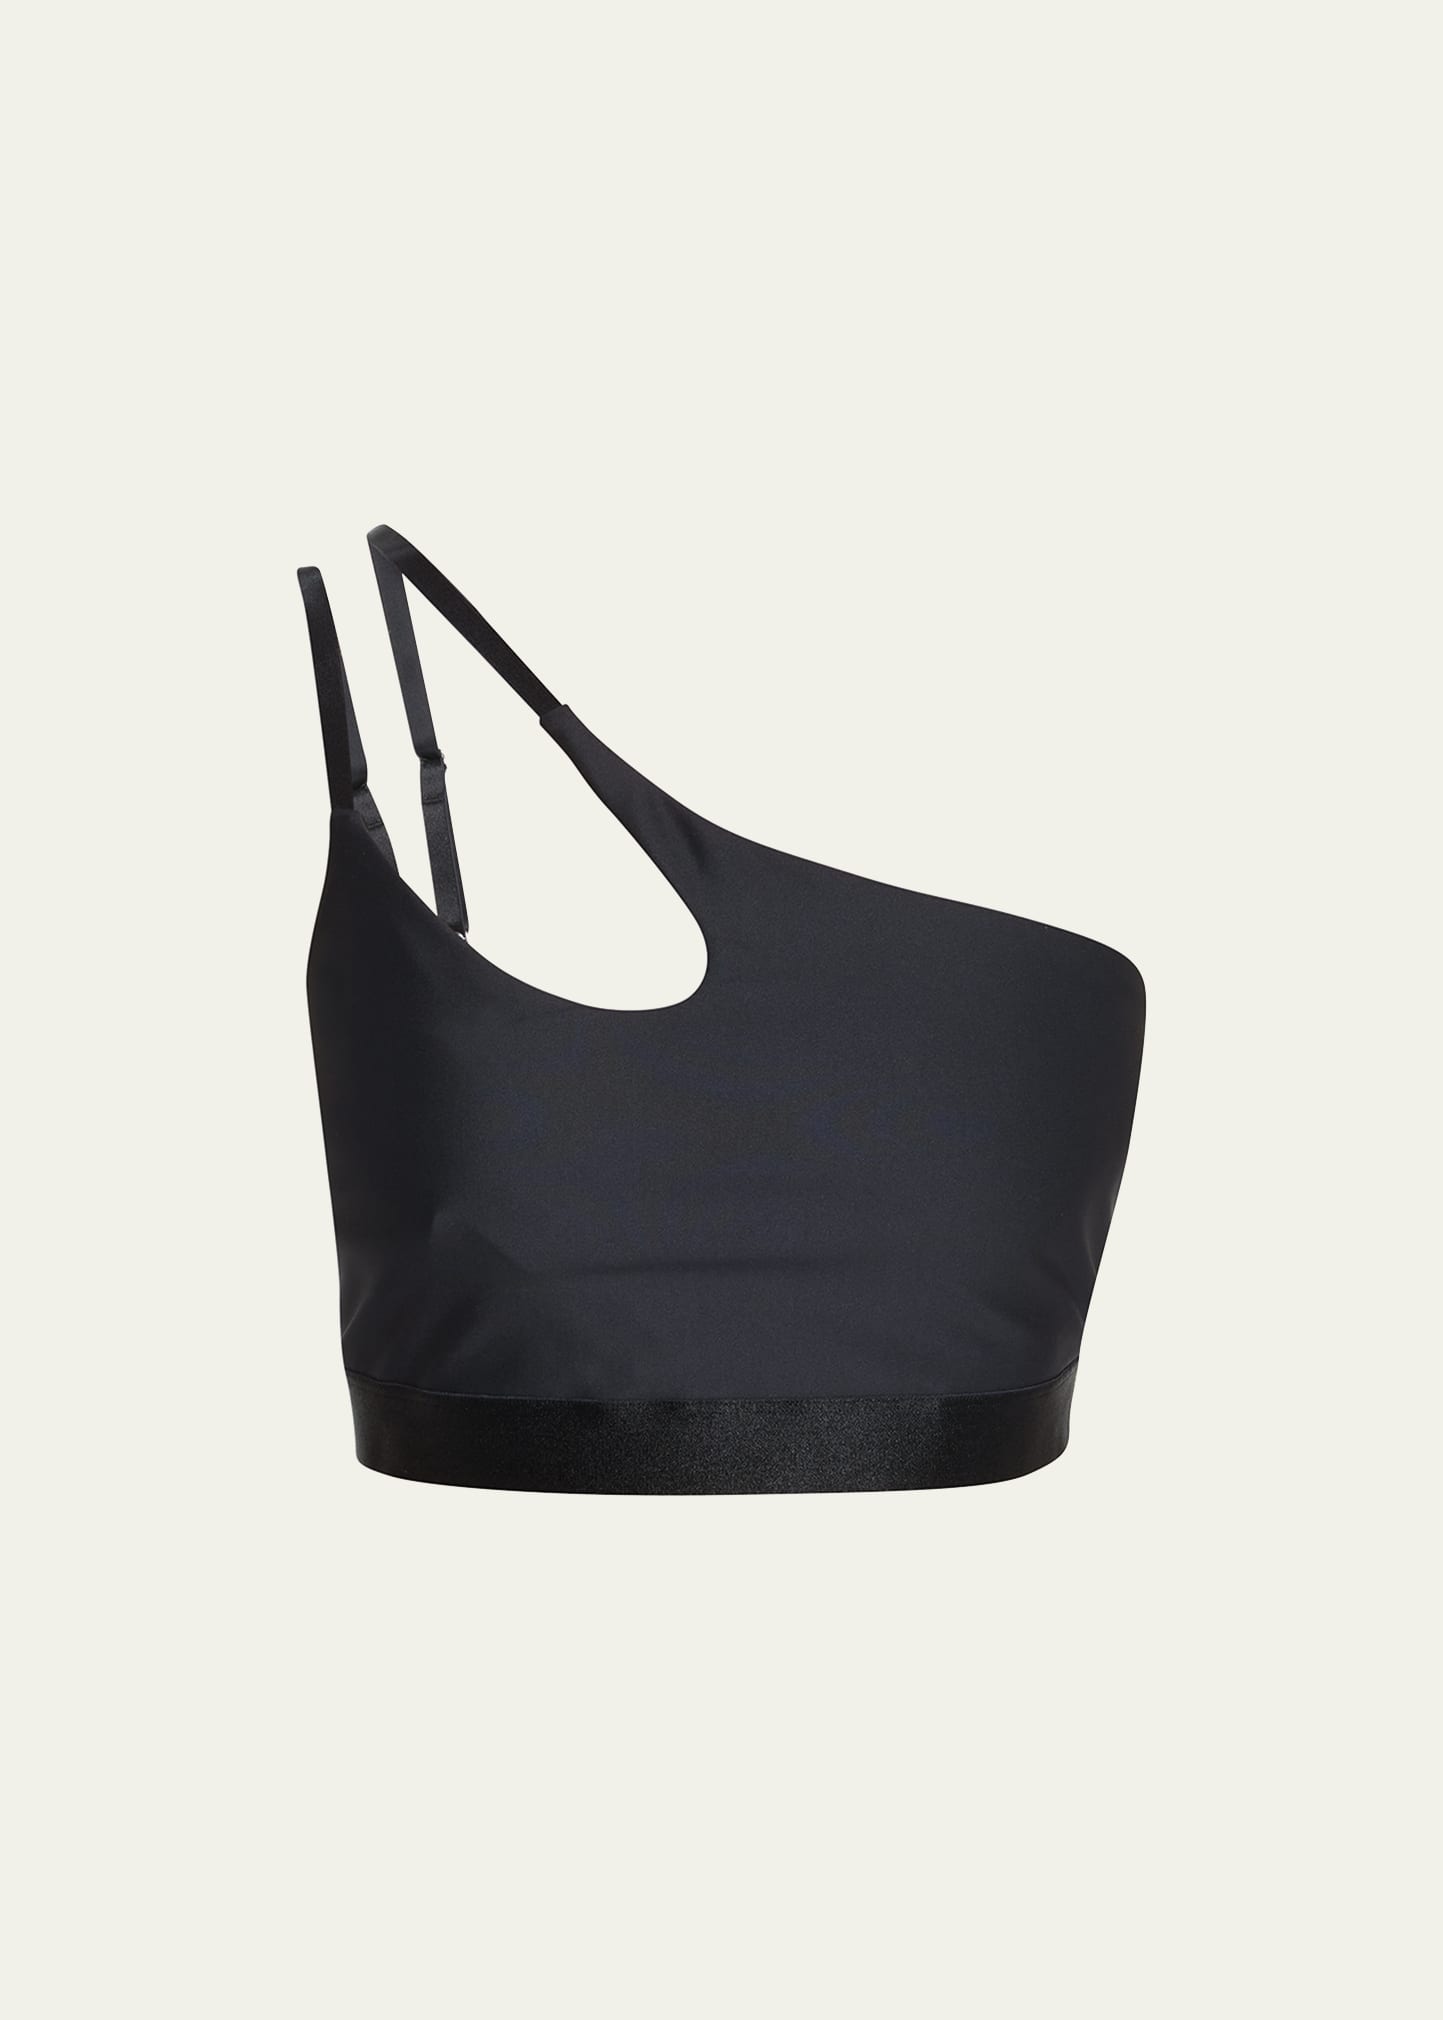 Airlift All Nighter Sports Bra